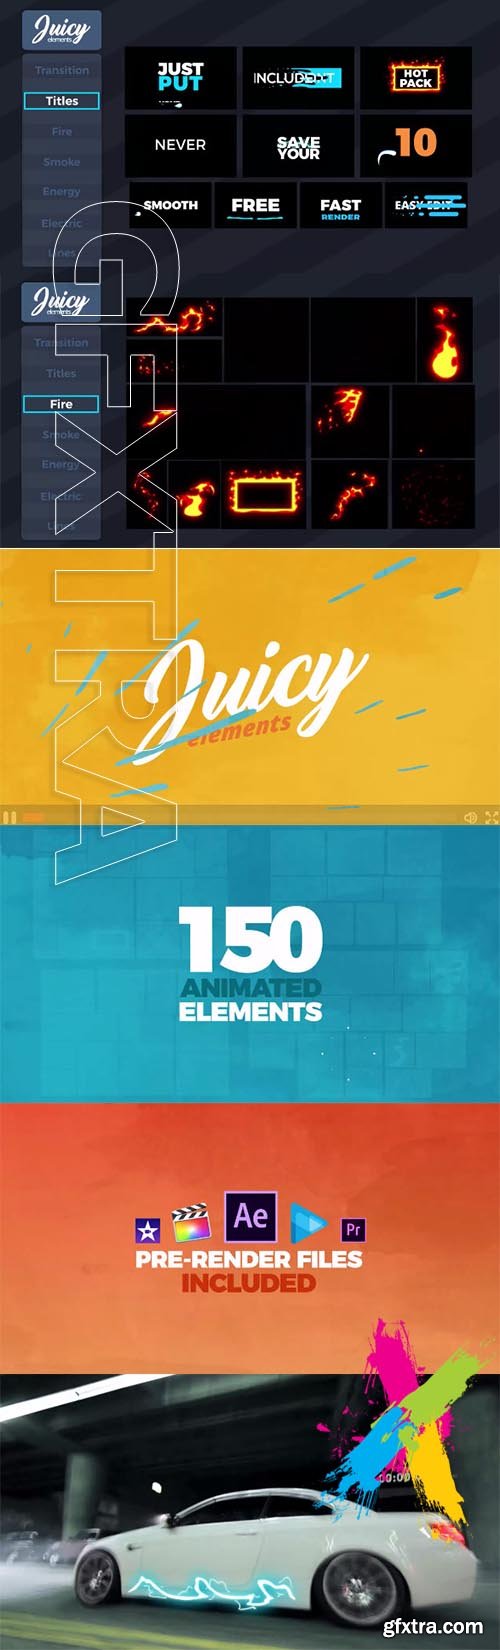 Juicy Elements - After Effects